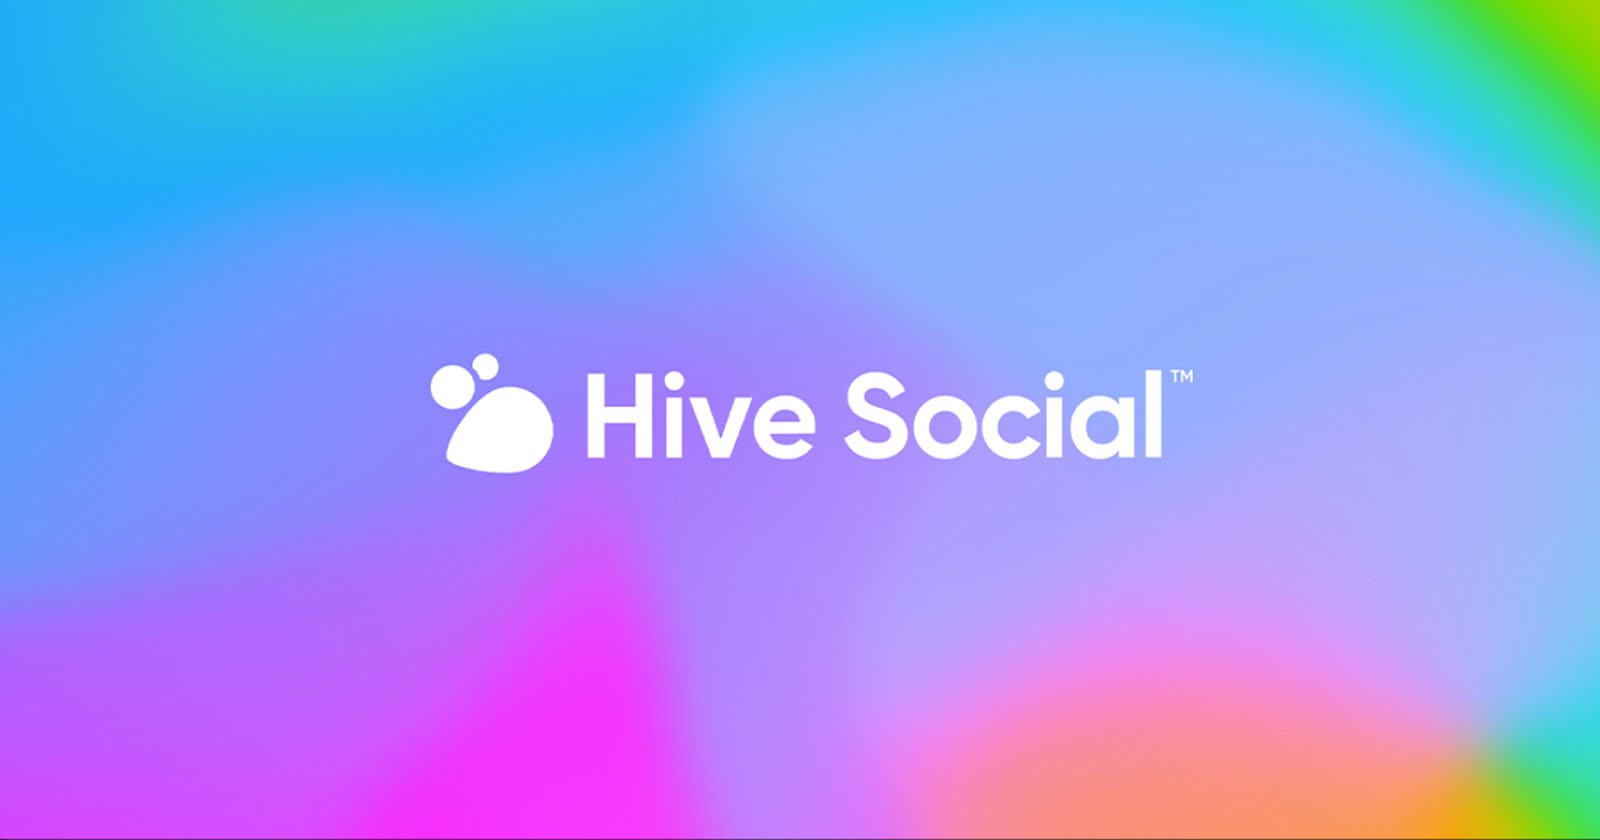 Hive Social Shuts Down App Due To Security Issues After Rise in Sign-ups